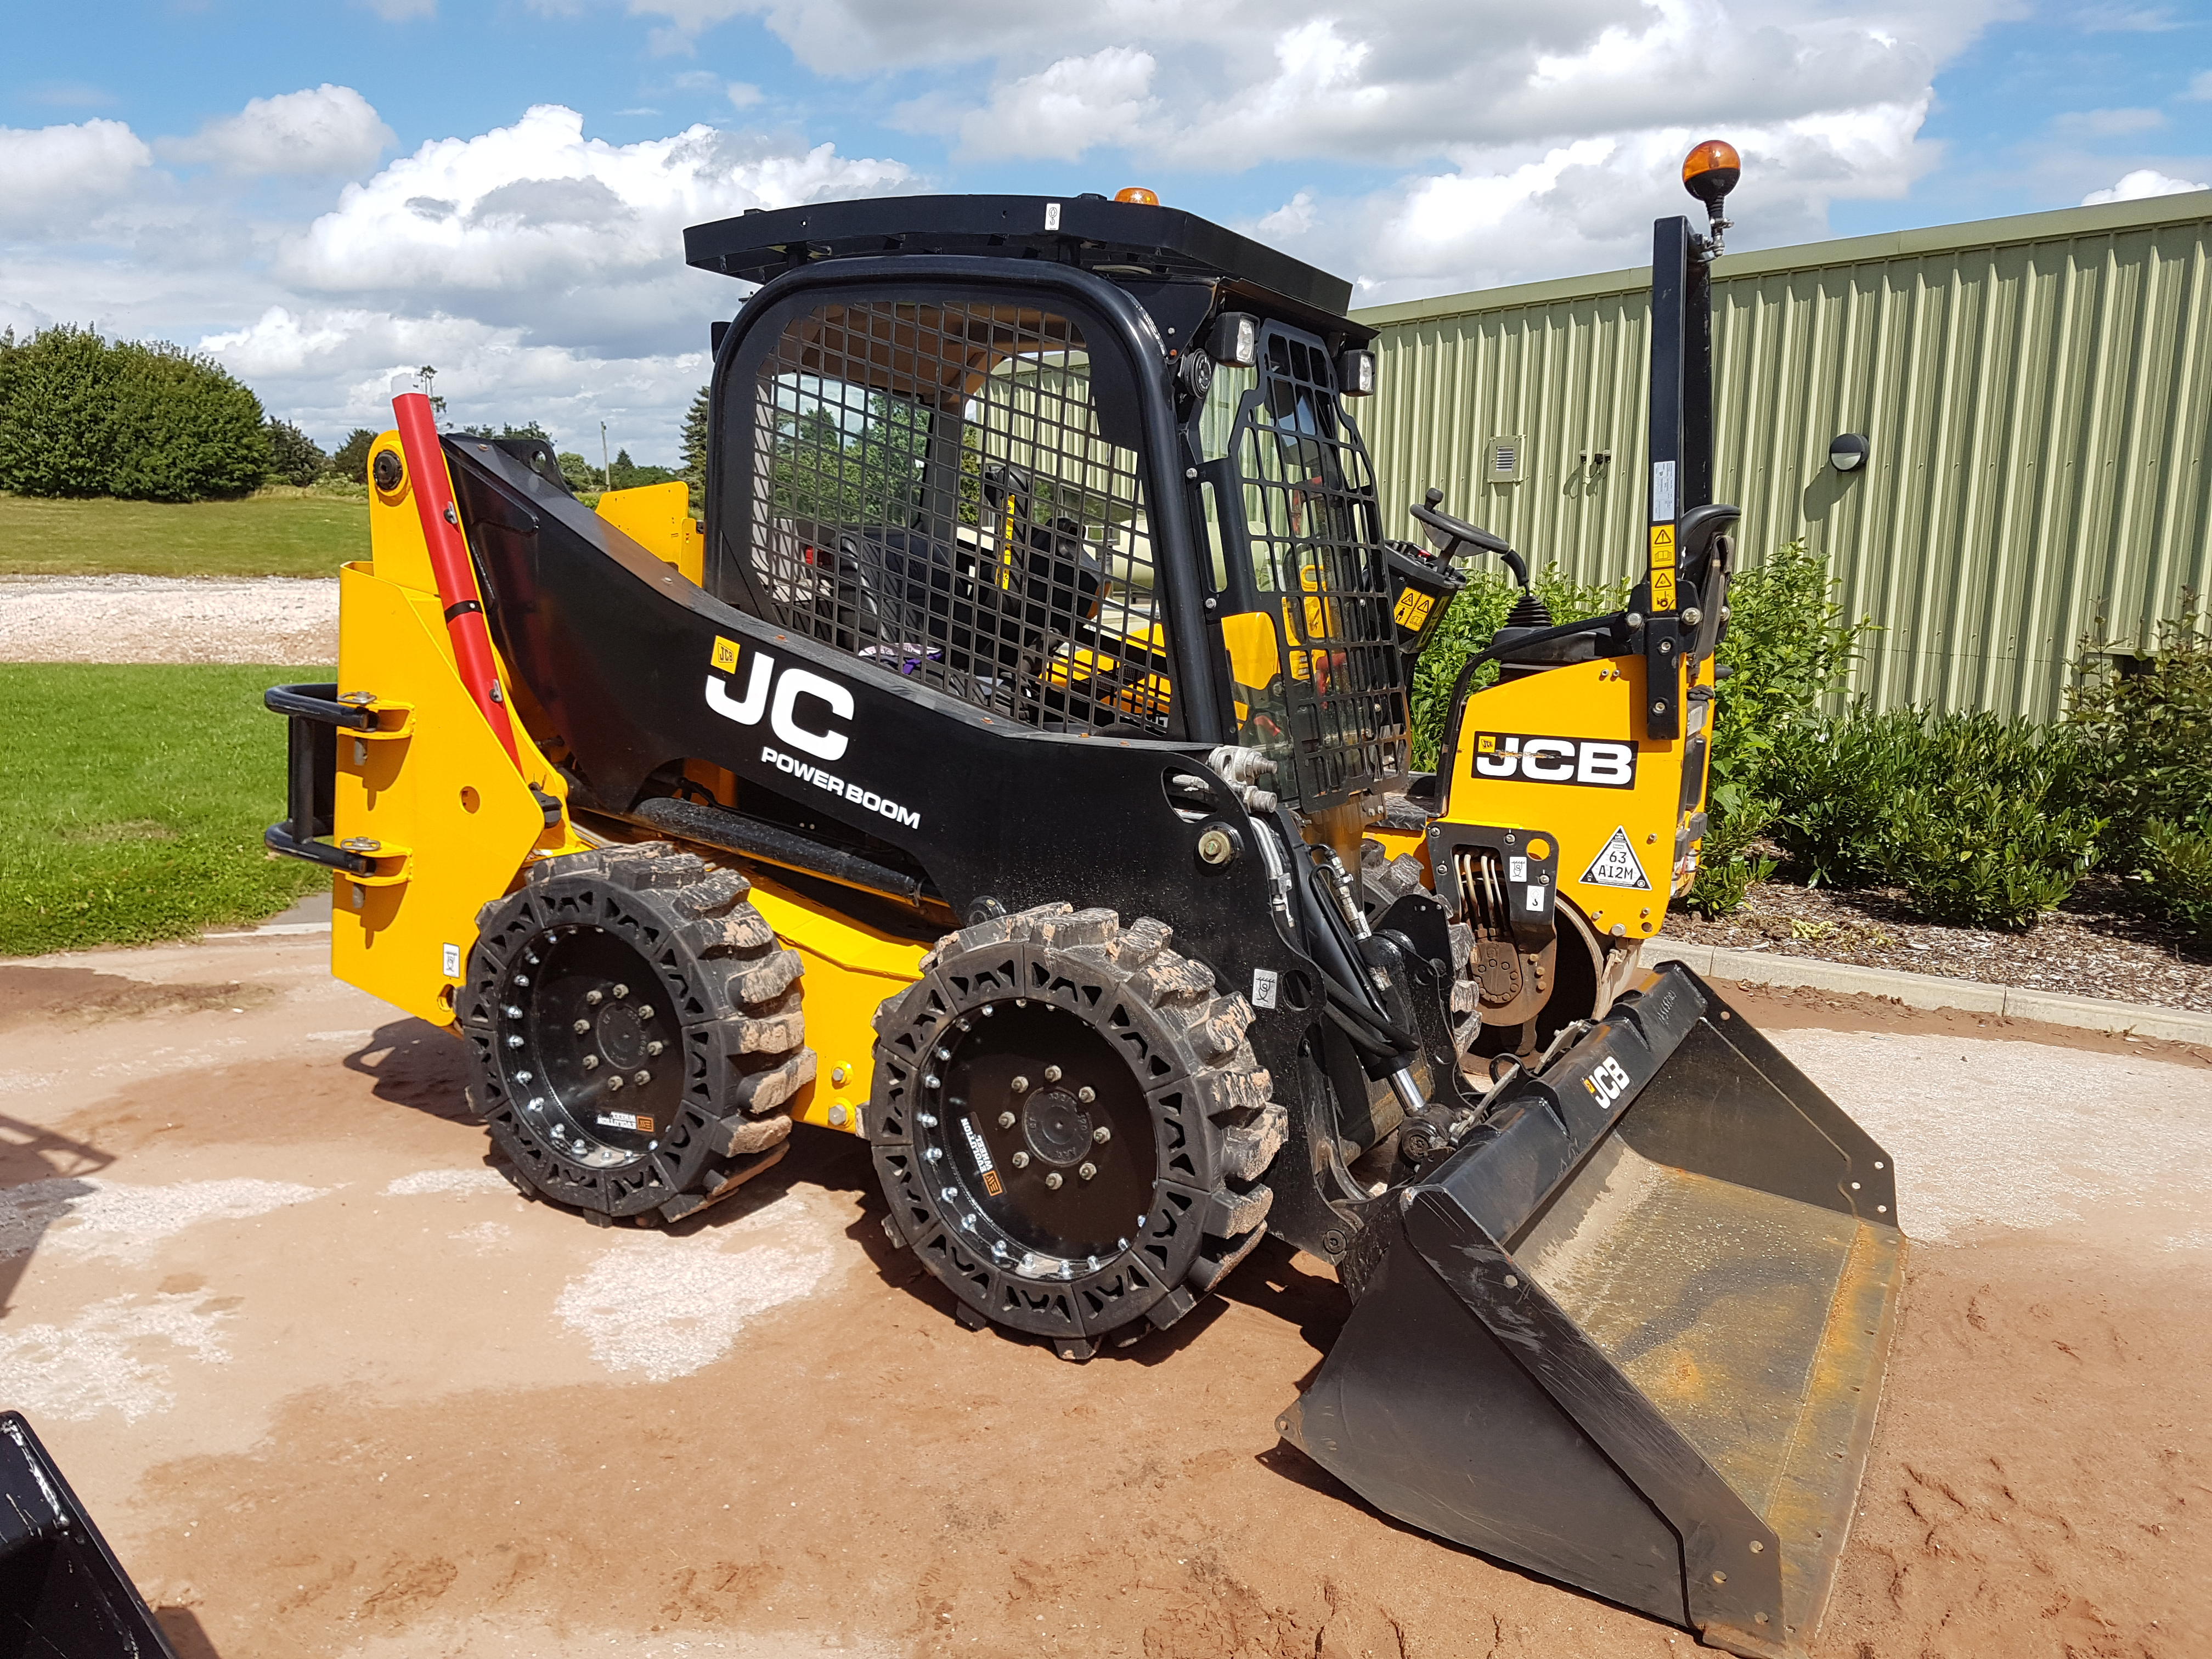 This images shows a yellow JCB Skid Steer using our traction skid steer tires